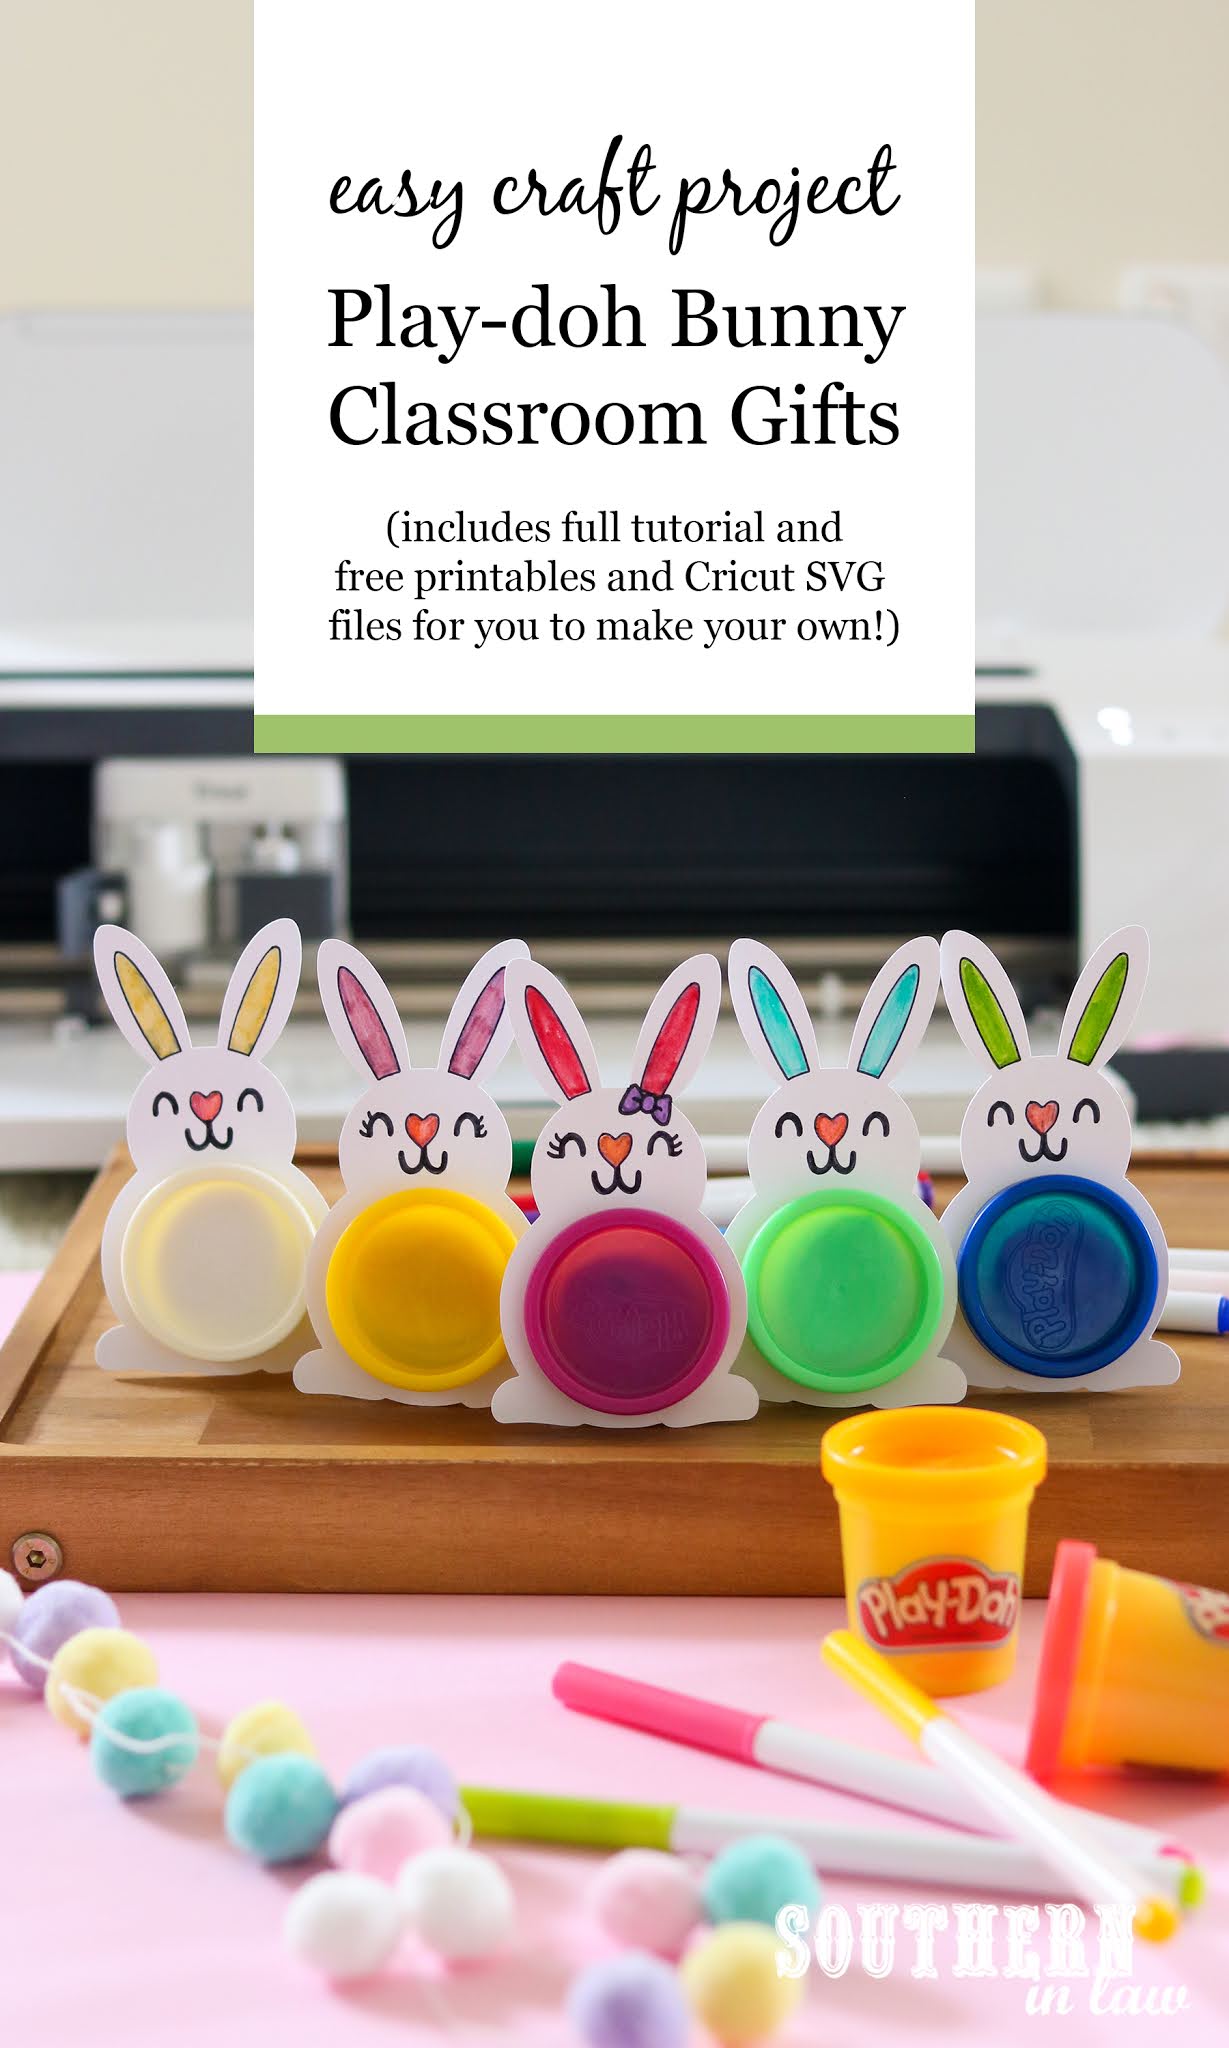 Southern In Law: Easy Printable Easter Classroom Gift - PlayDoh